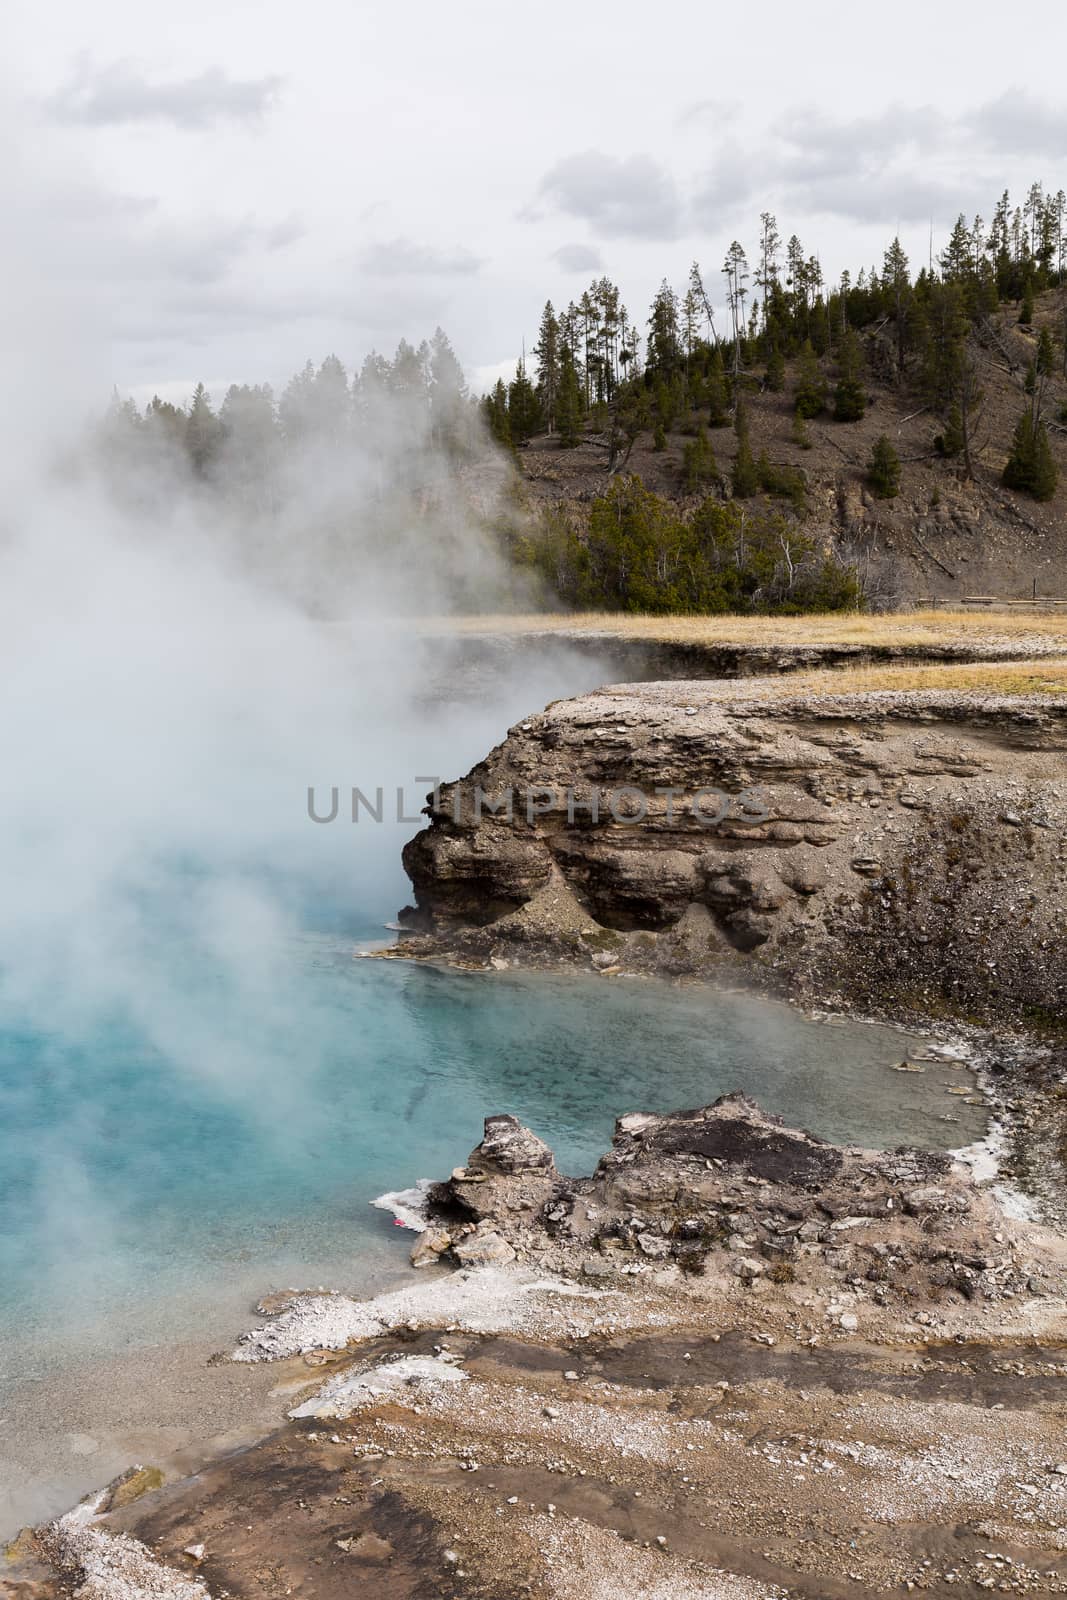 View of the Excelsior Geyser Crater in the Midway Geyser Basin in Yellowstone National Park.